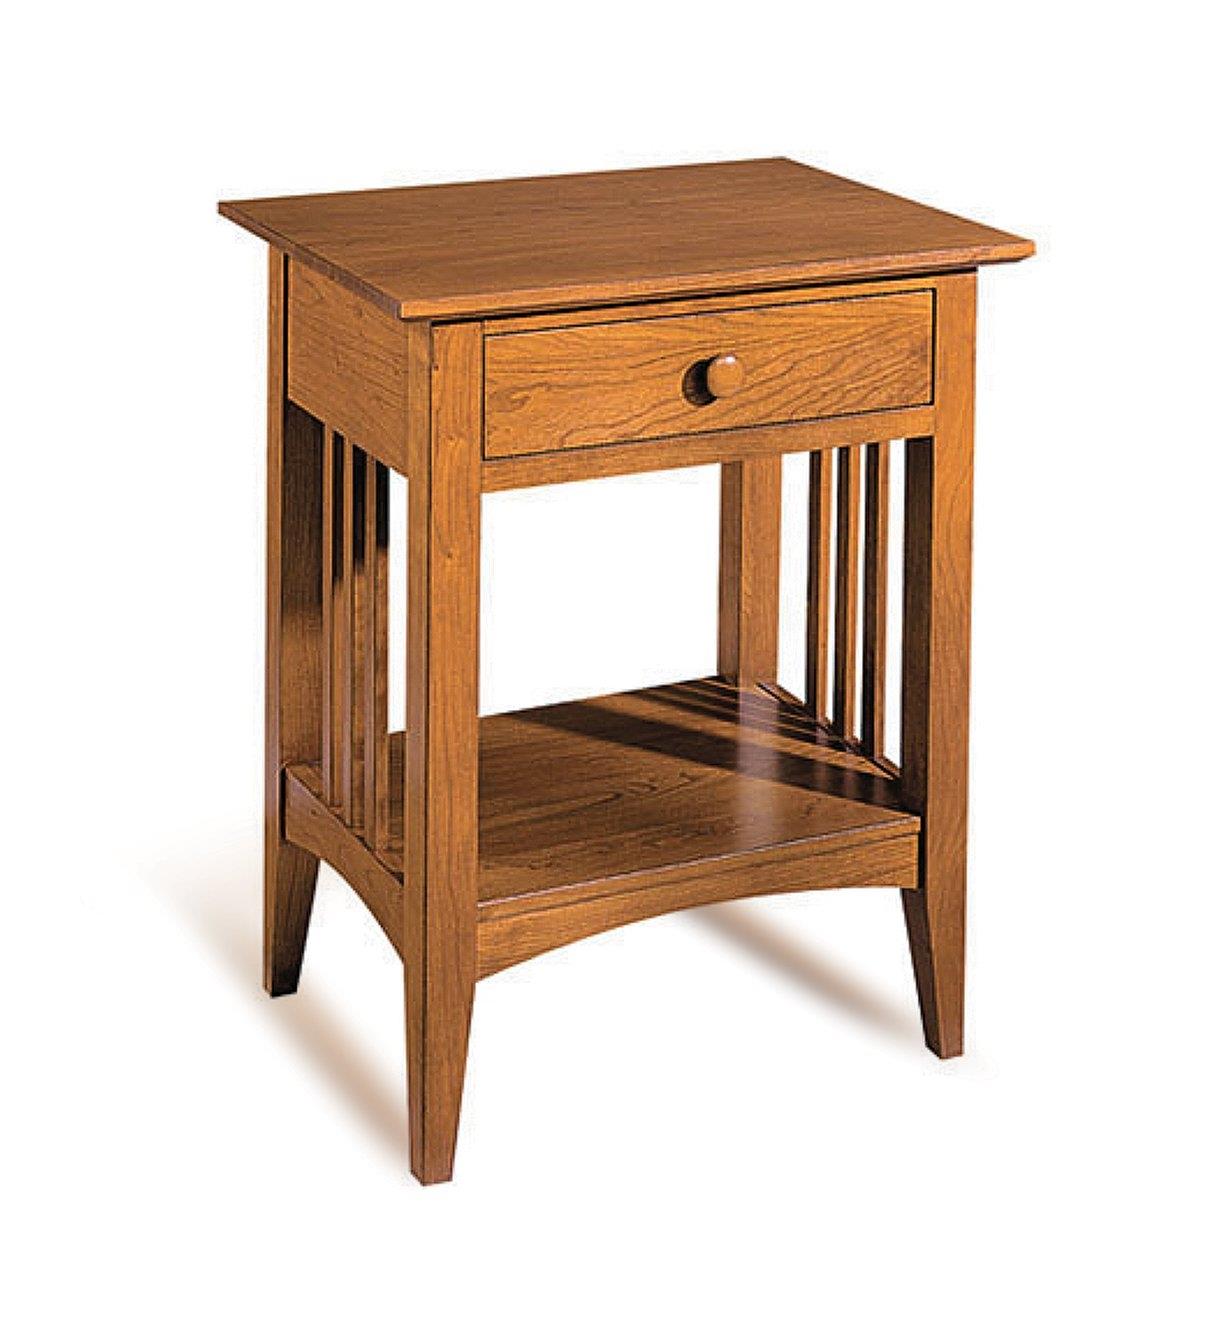 01L5124 - Mission Contemporary Nightstand Plan